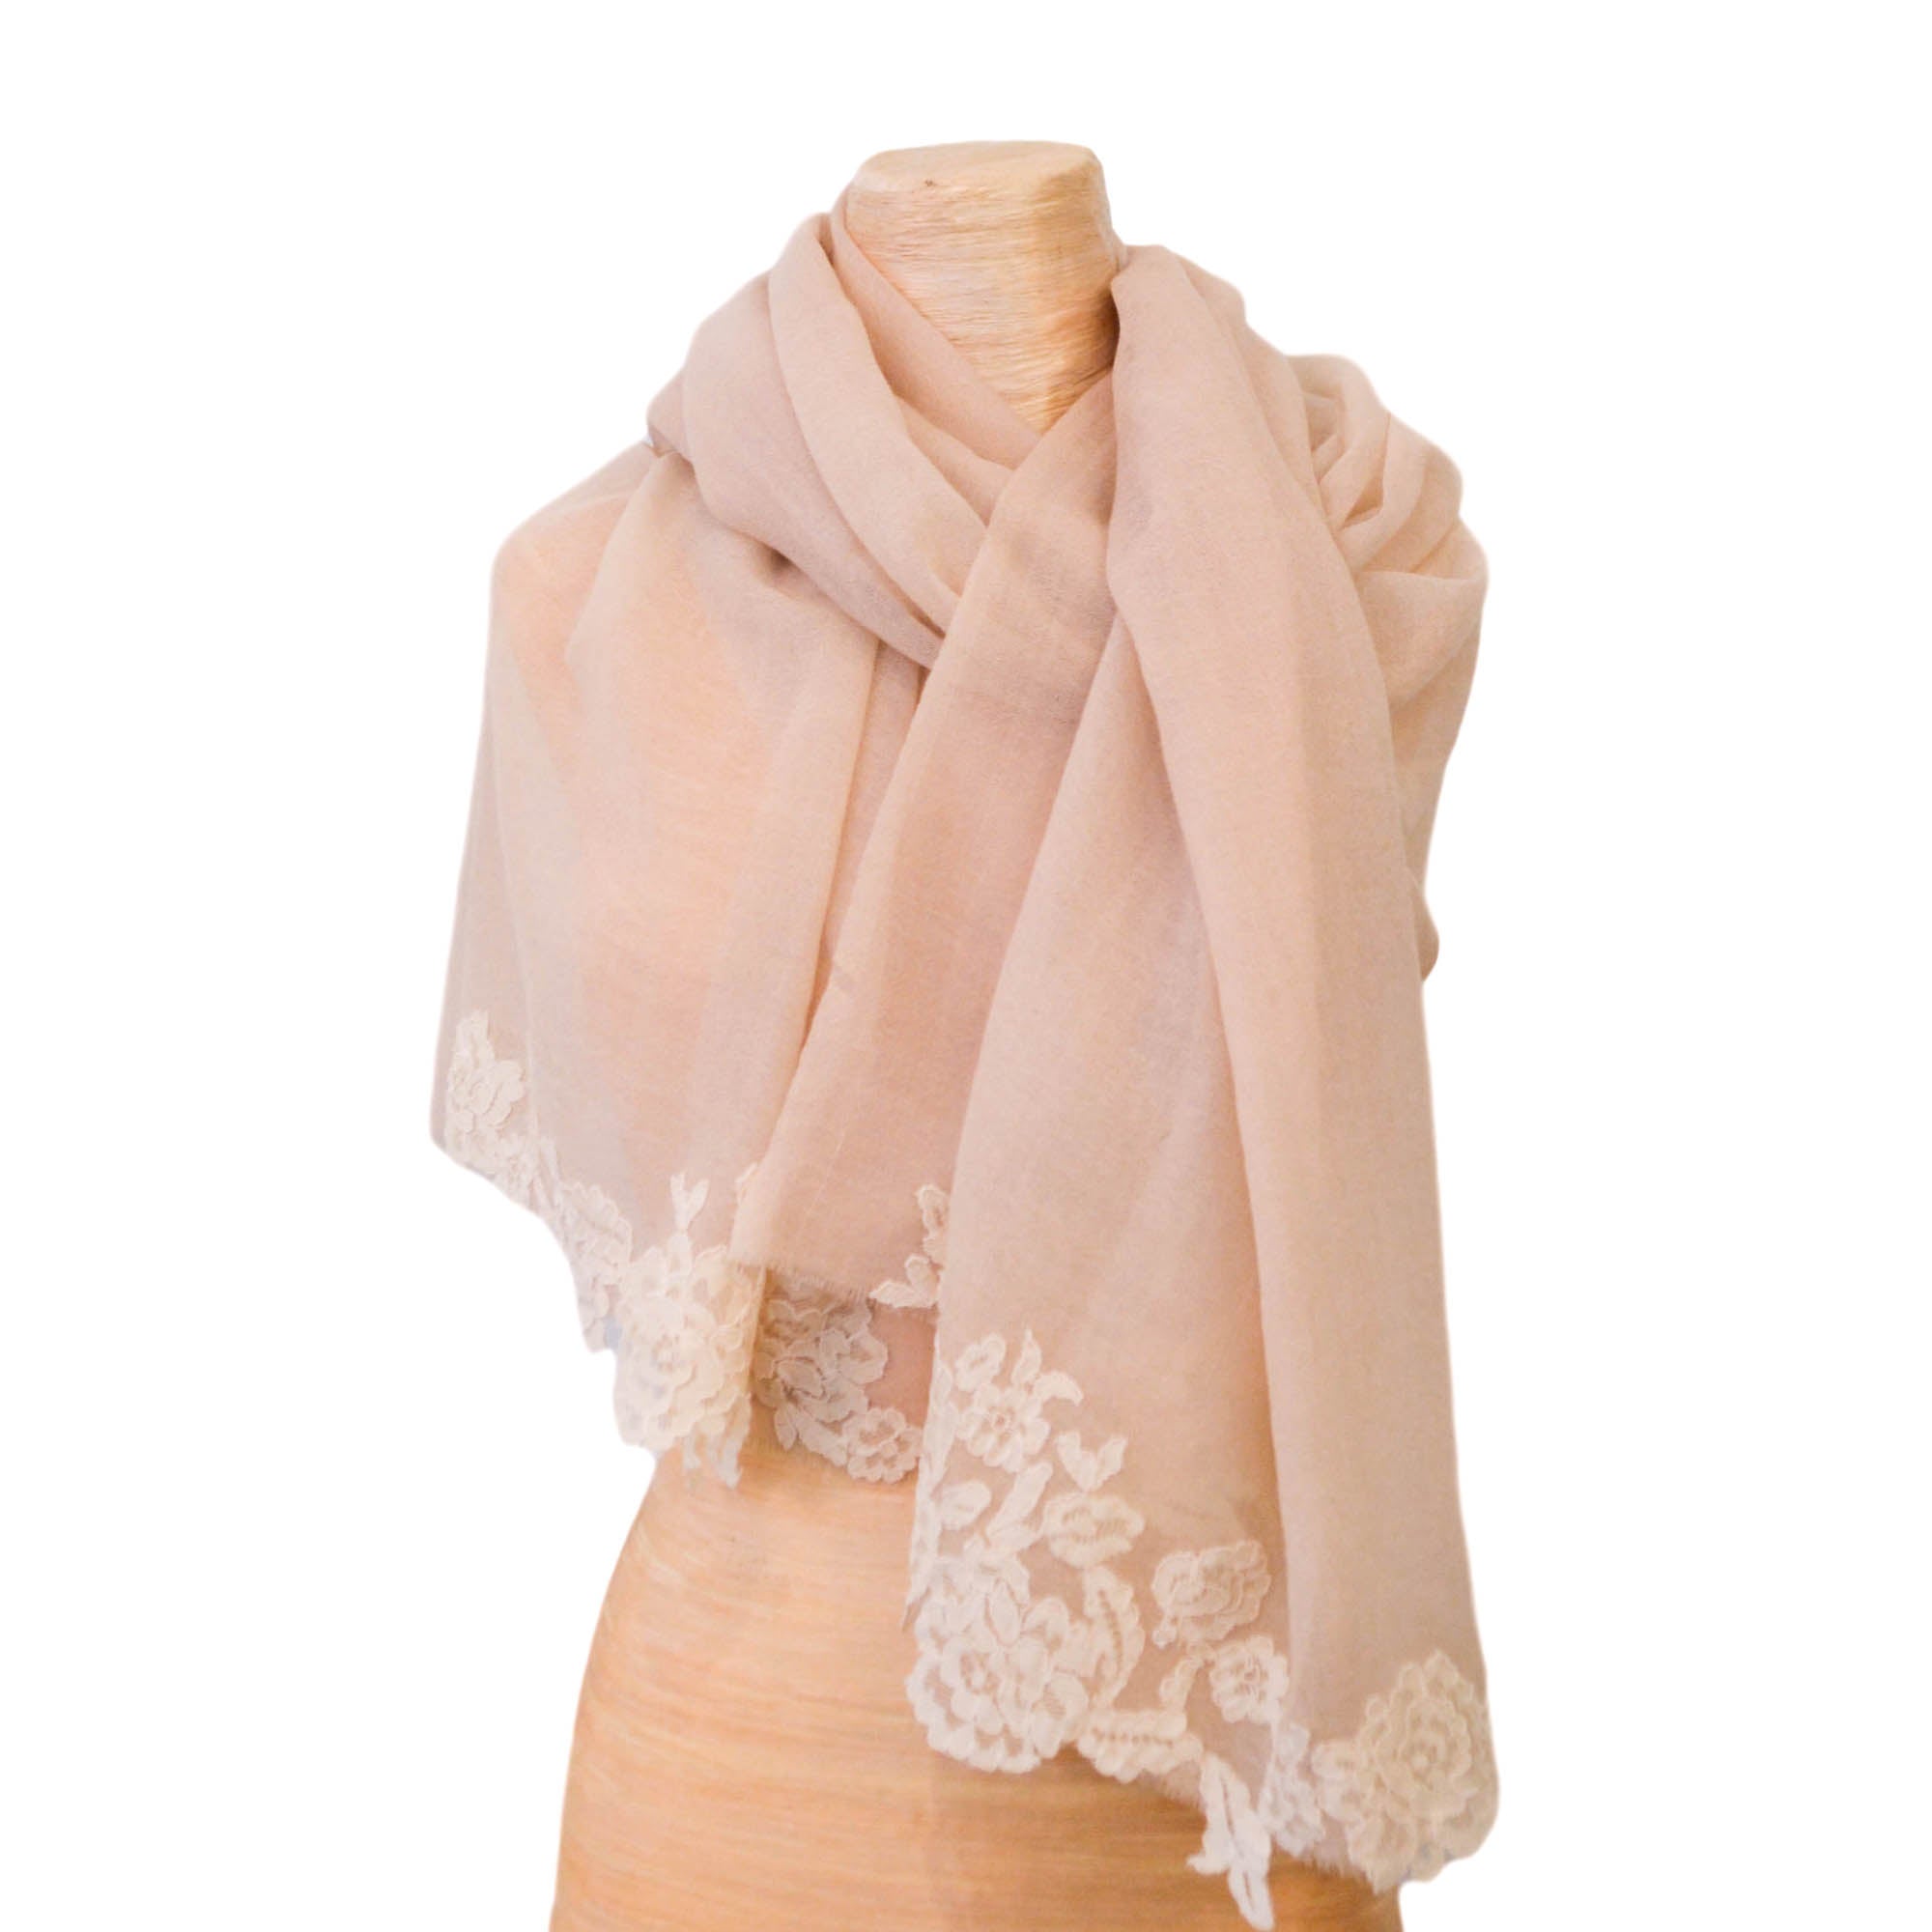 Pale Rose Shawl with Calais lace